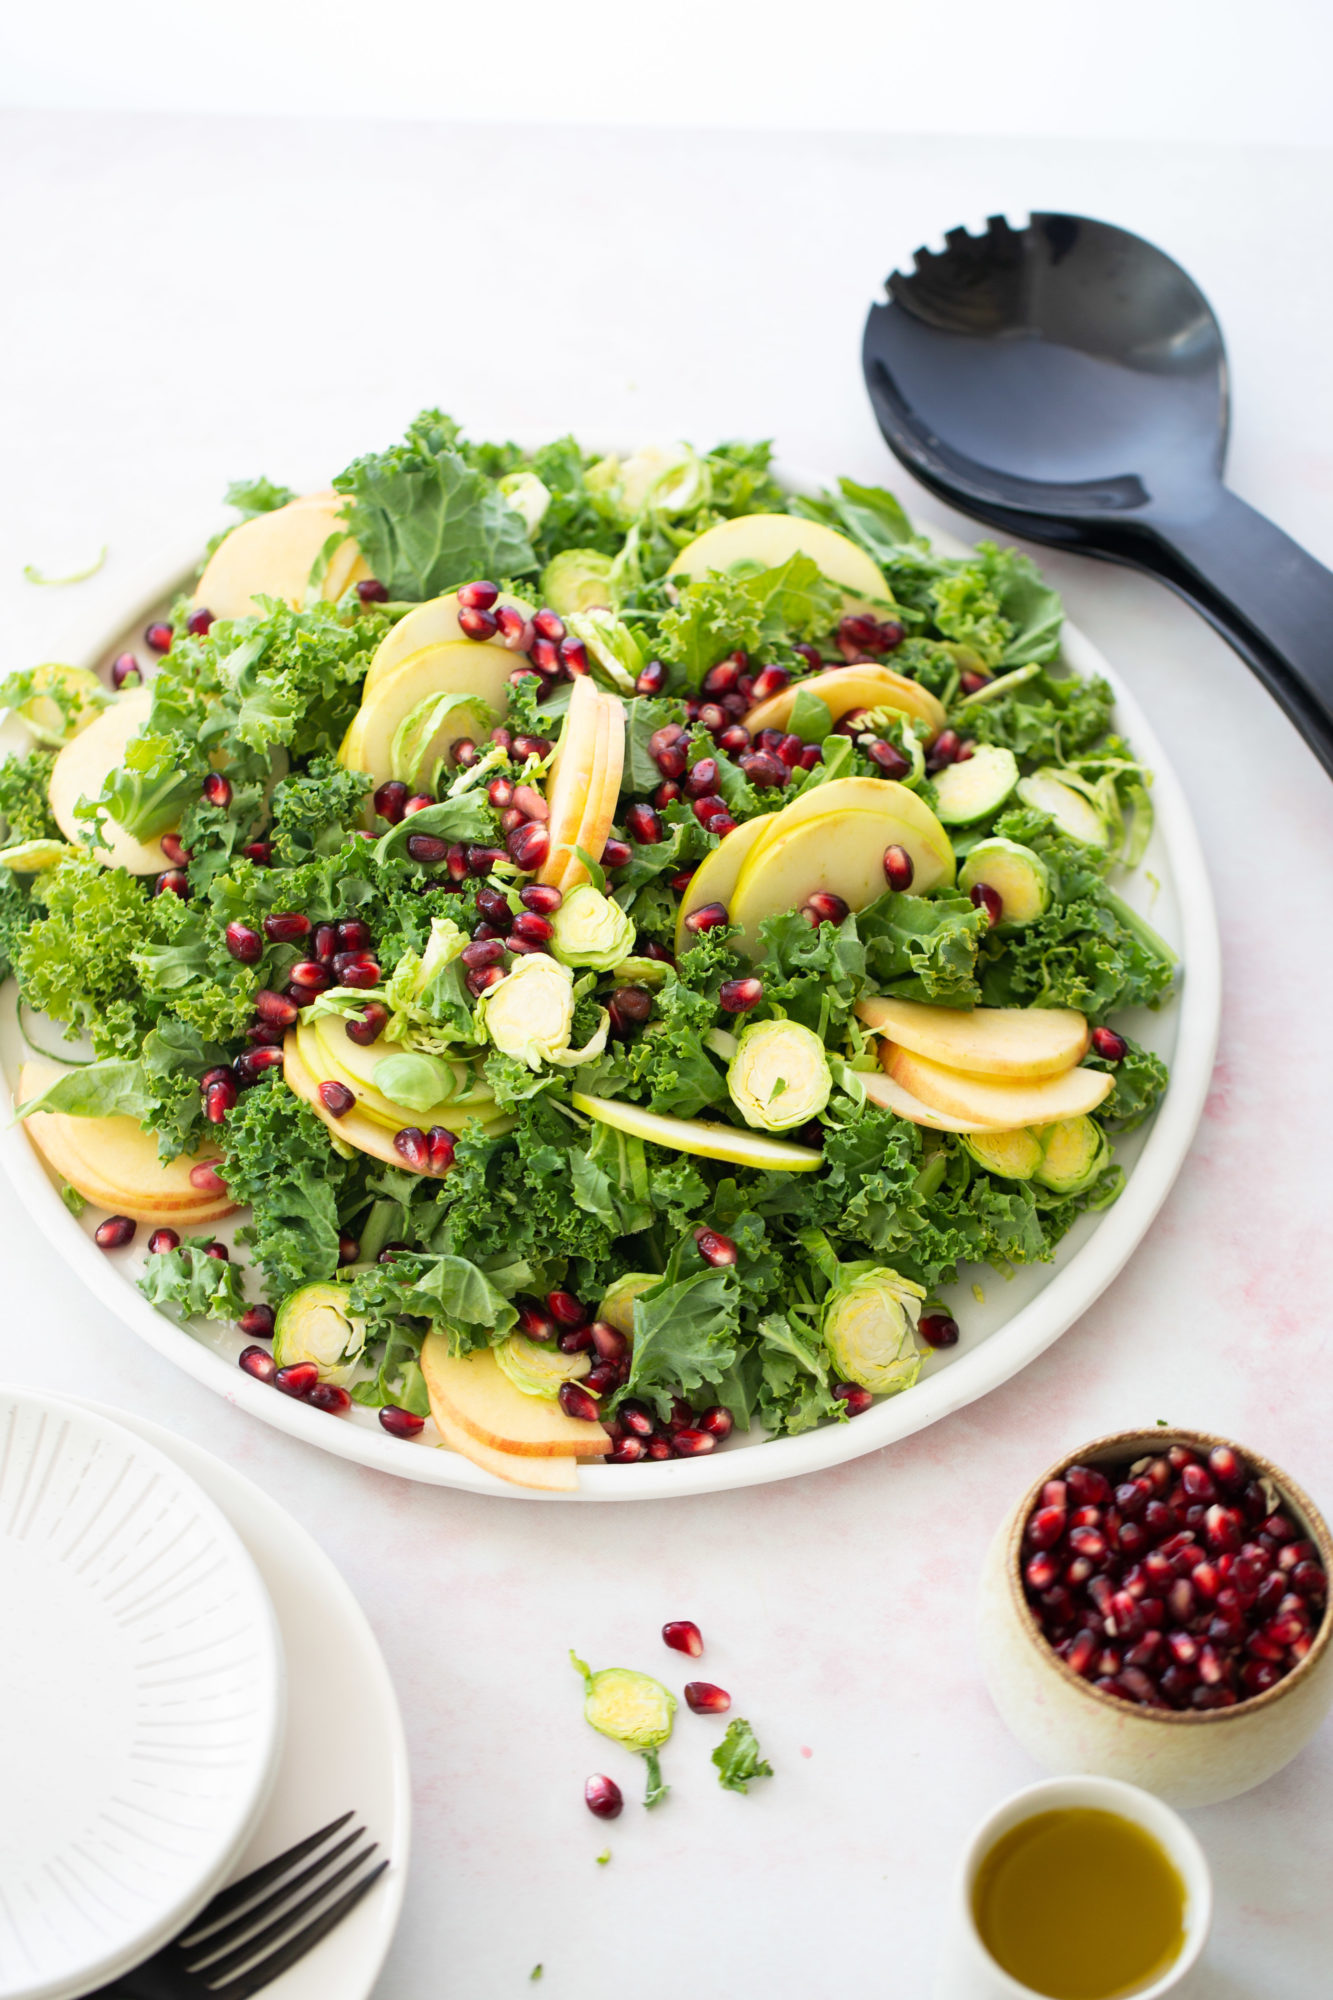 A plate of kale salad with apples and pomegranate.